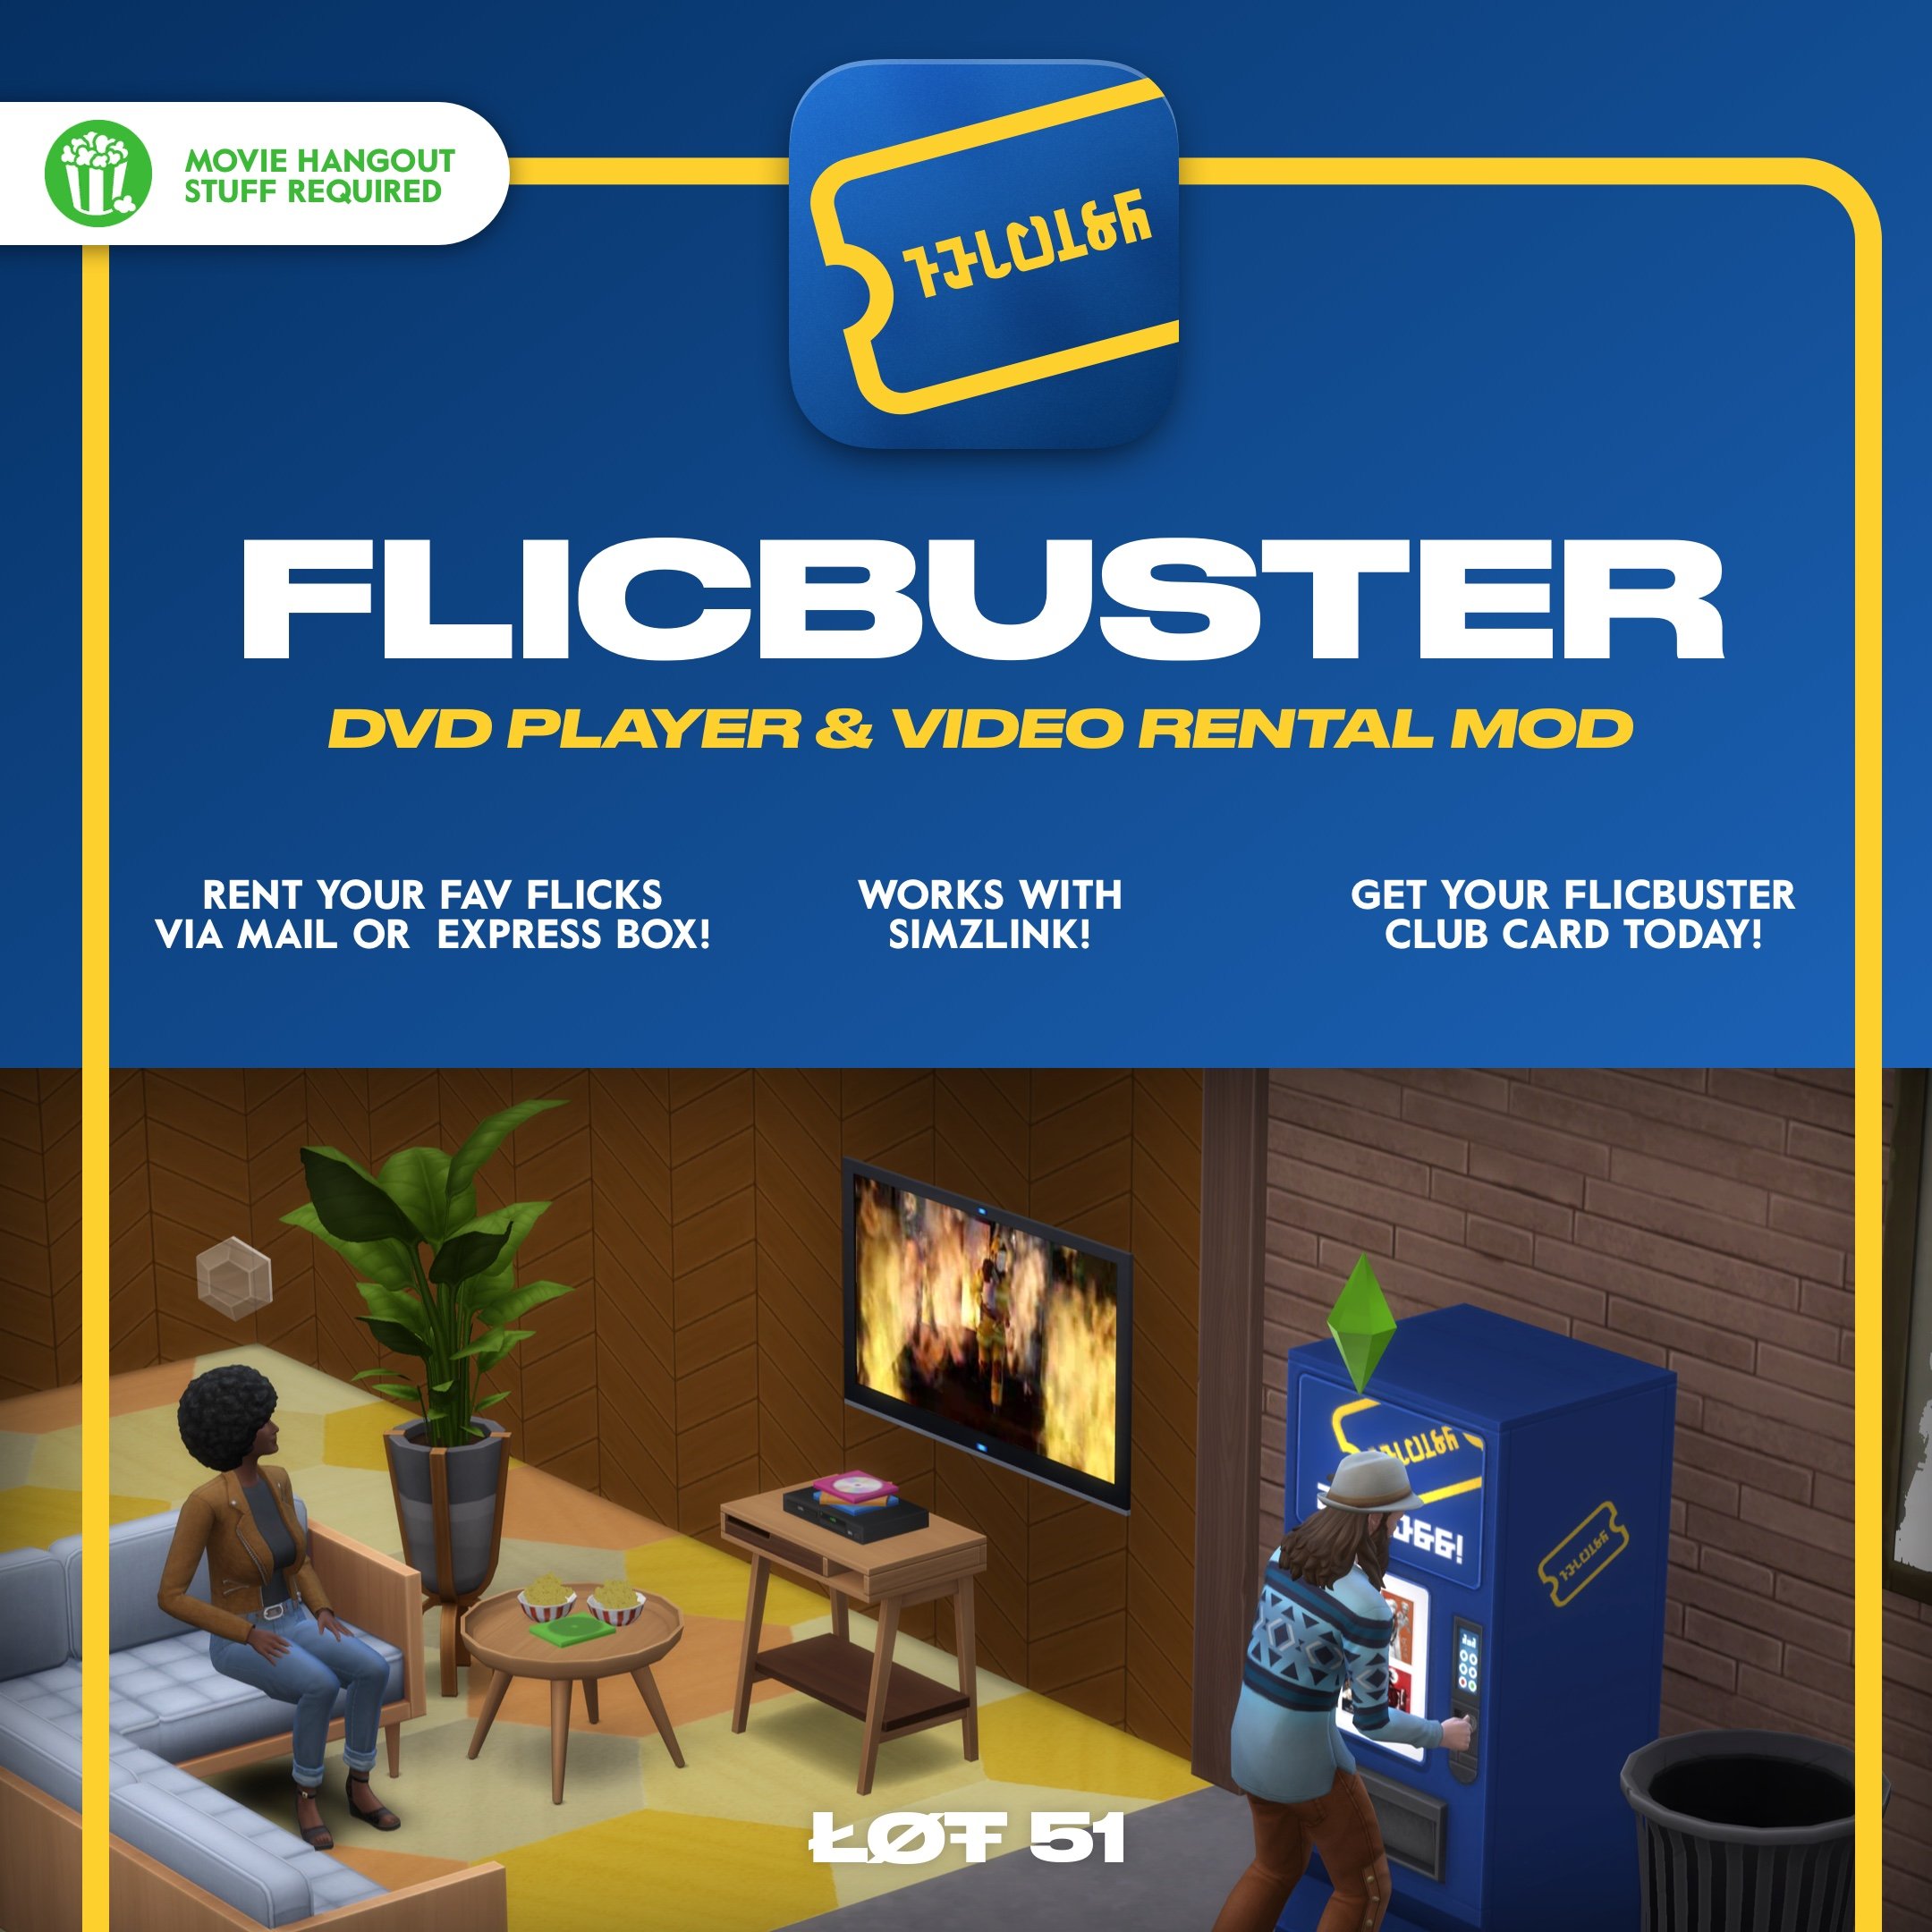 Flicbuster